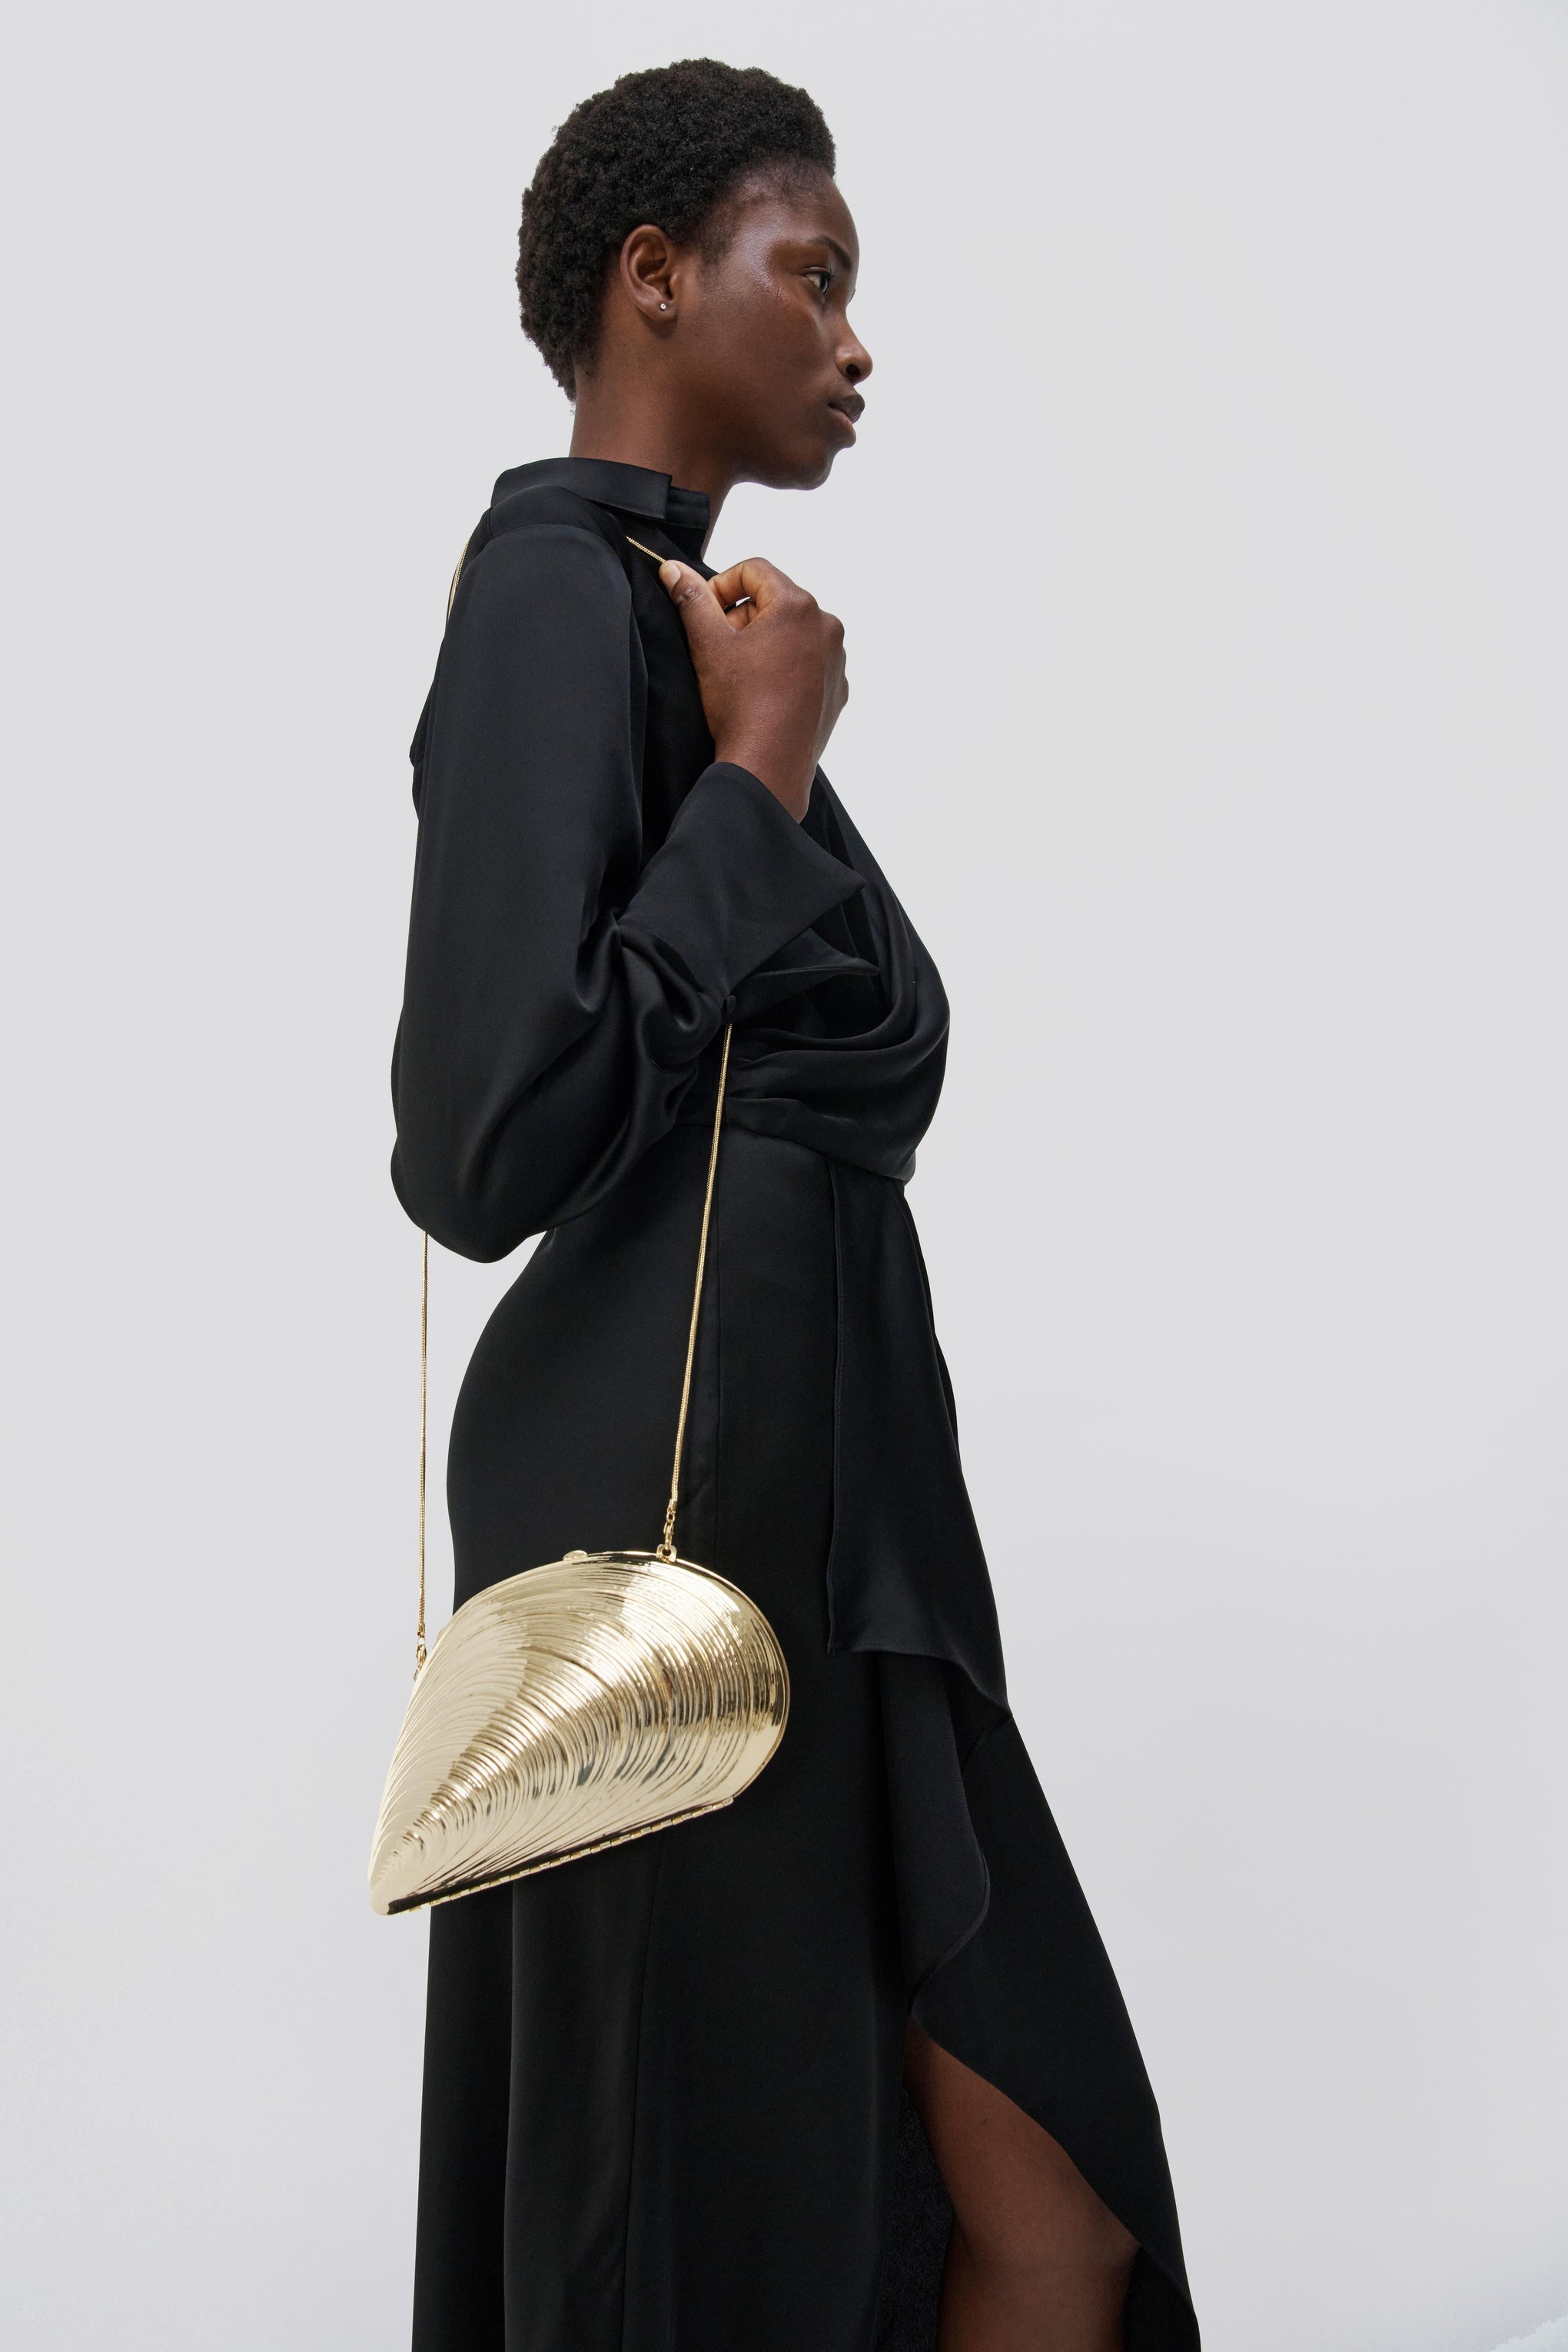 The Jonathan Simkhai Bridget Metal Oyster Shell Clutch in Gold available at The New Trend Australia